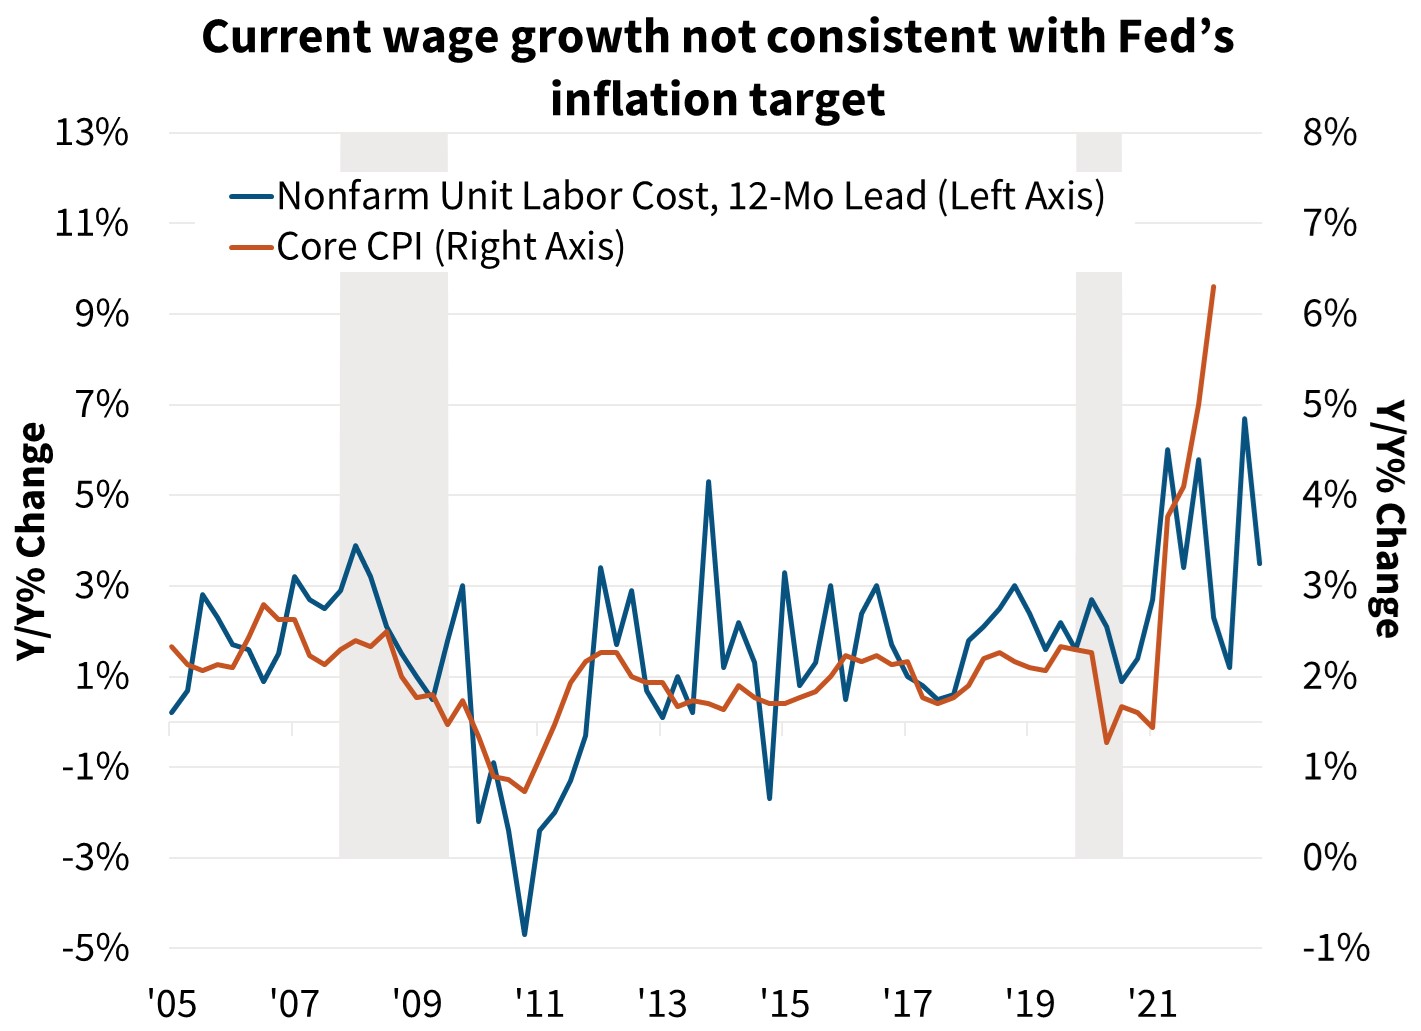  Current wage growth not consistent with Fed’s inflation target